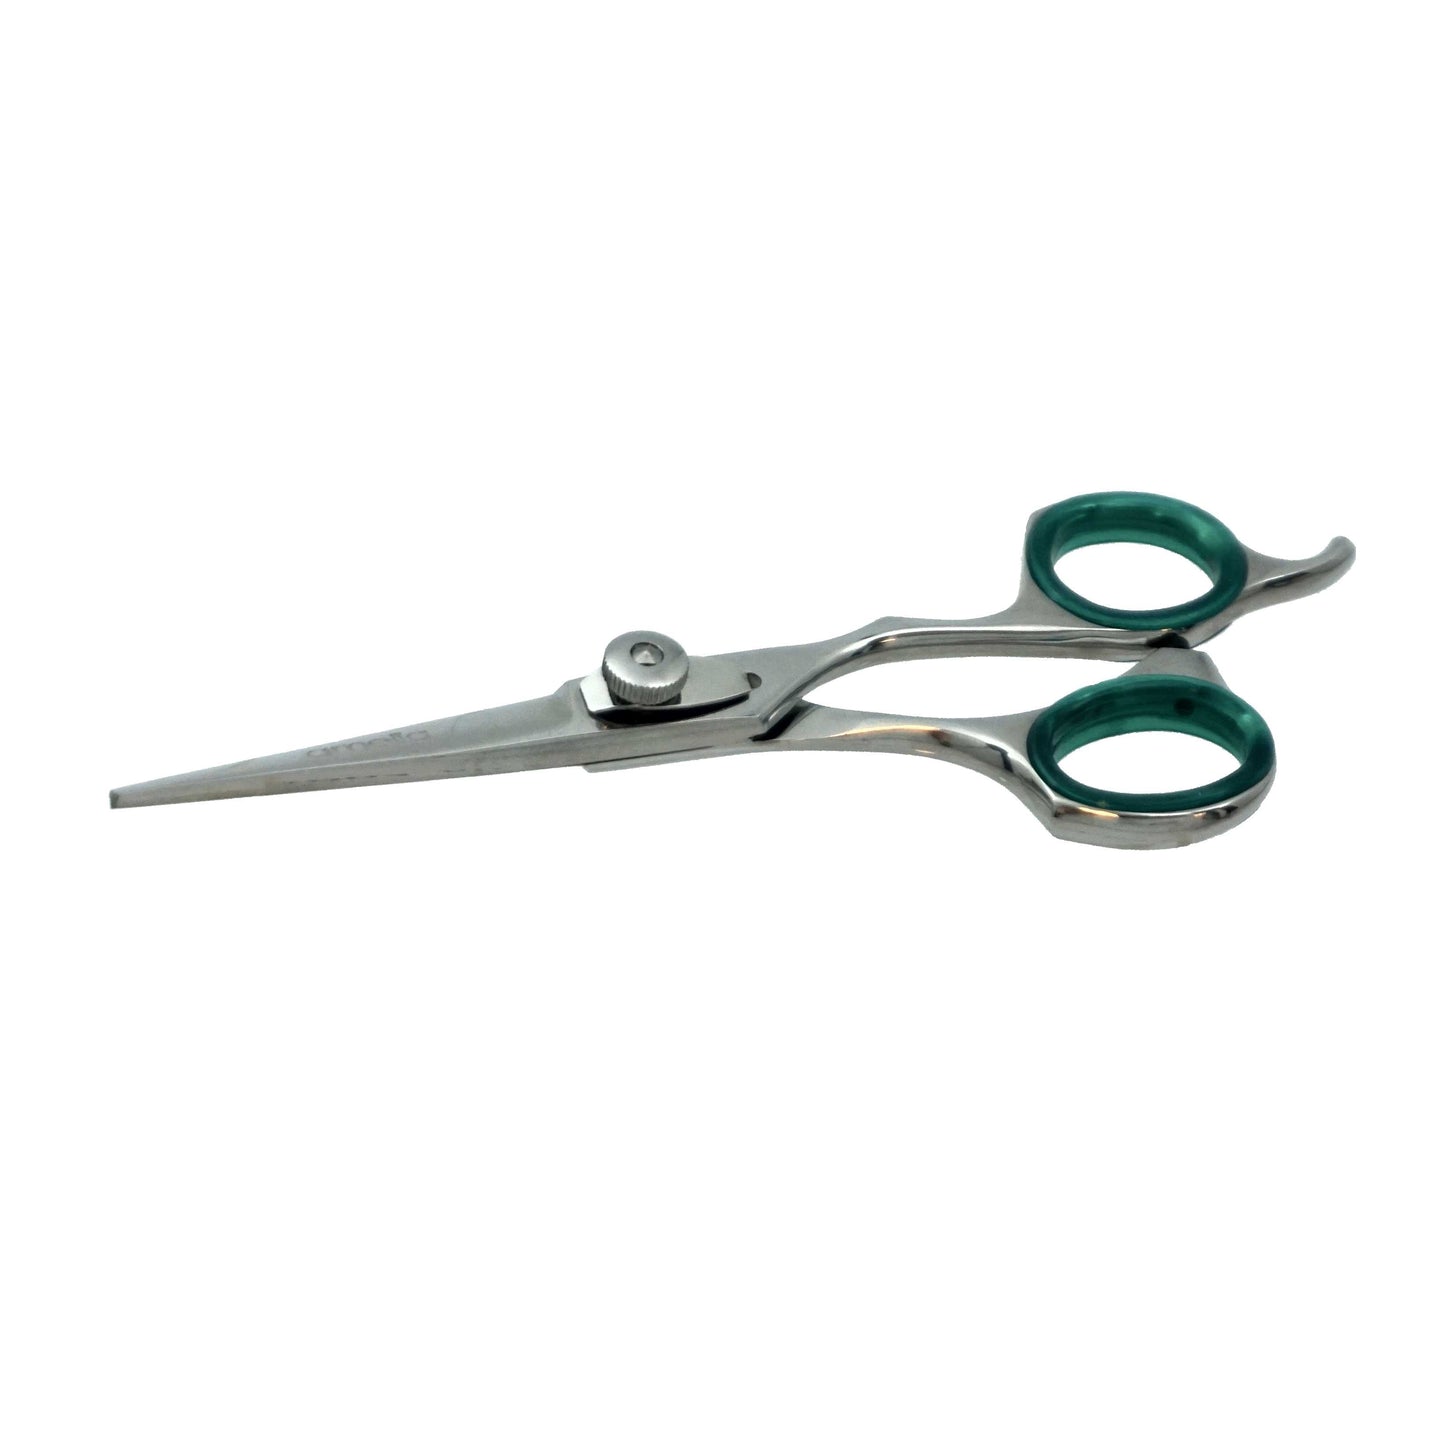 5.5" Right Handed, Stainless Steel Professional Shear, Fixed Finger Rest